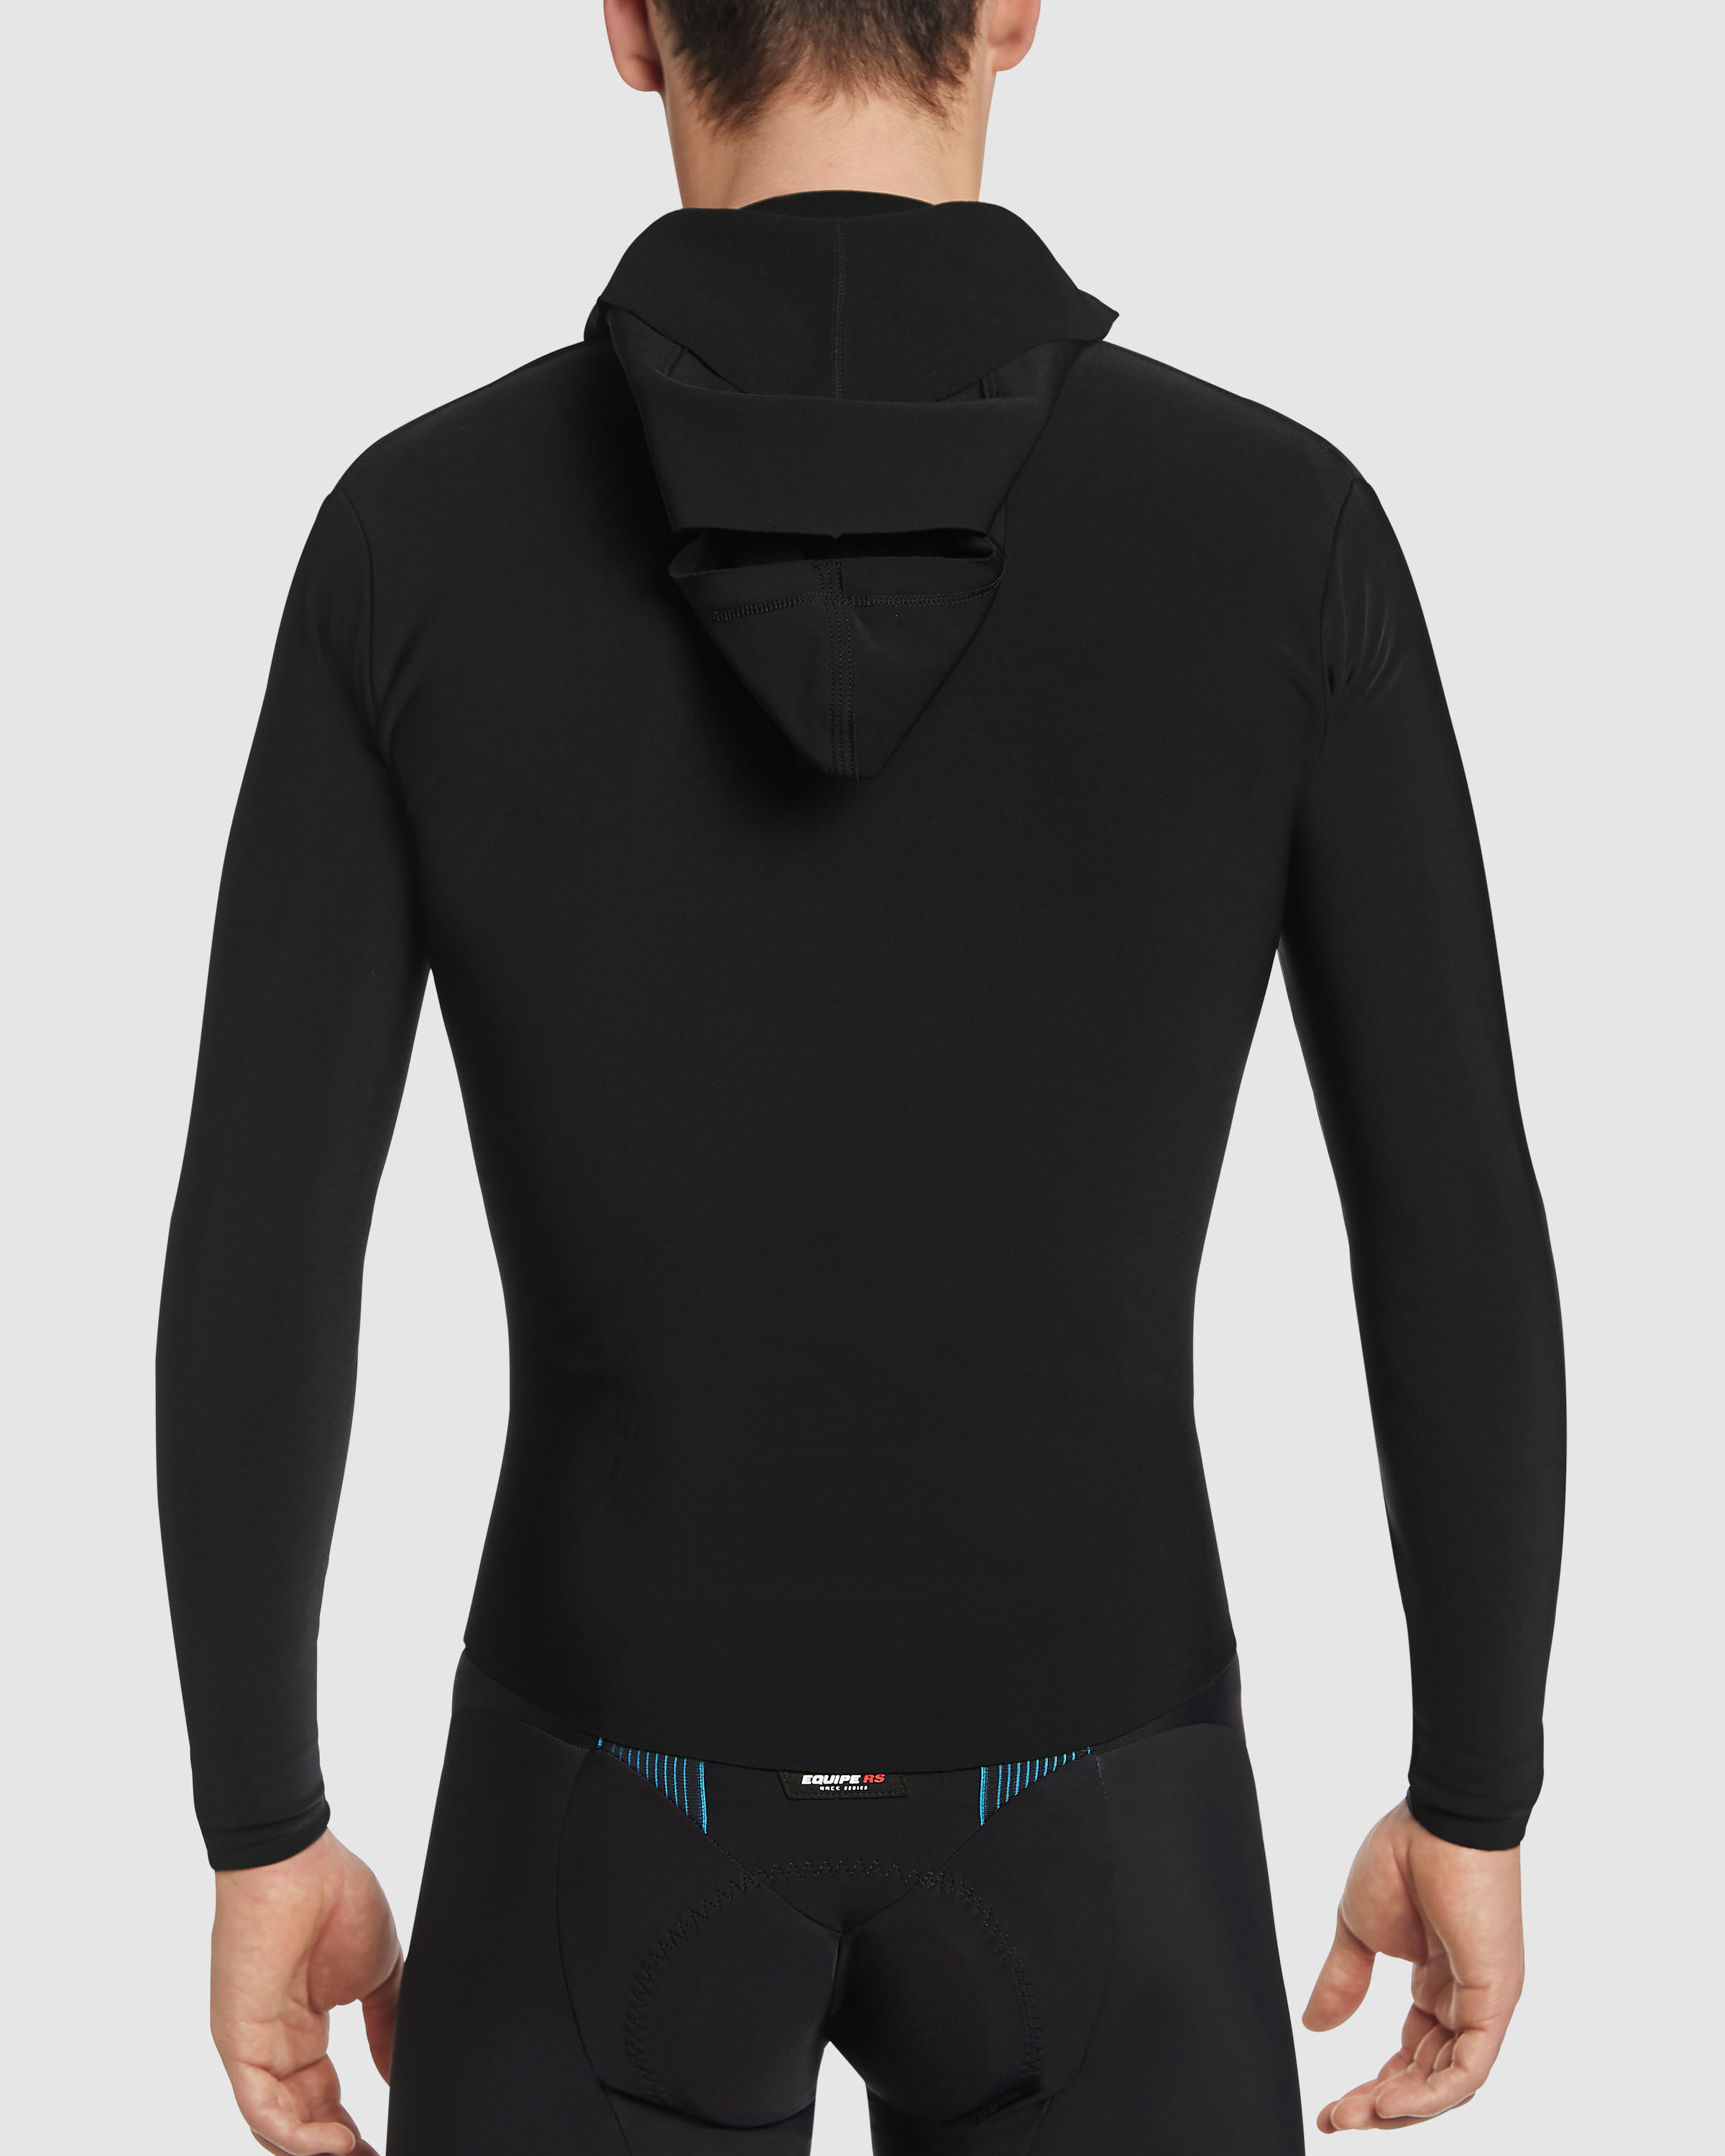 EQUIPE RS Winter LS Mid Layer, blackSeries » ASSOS Of